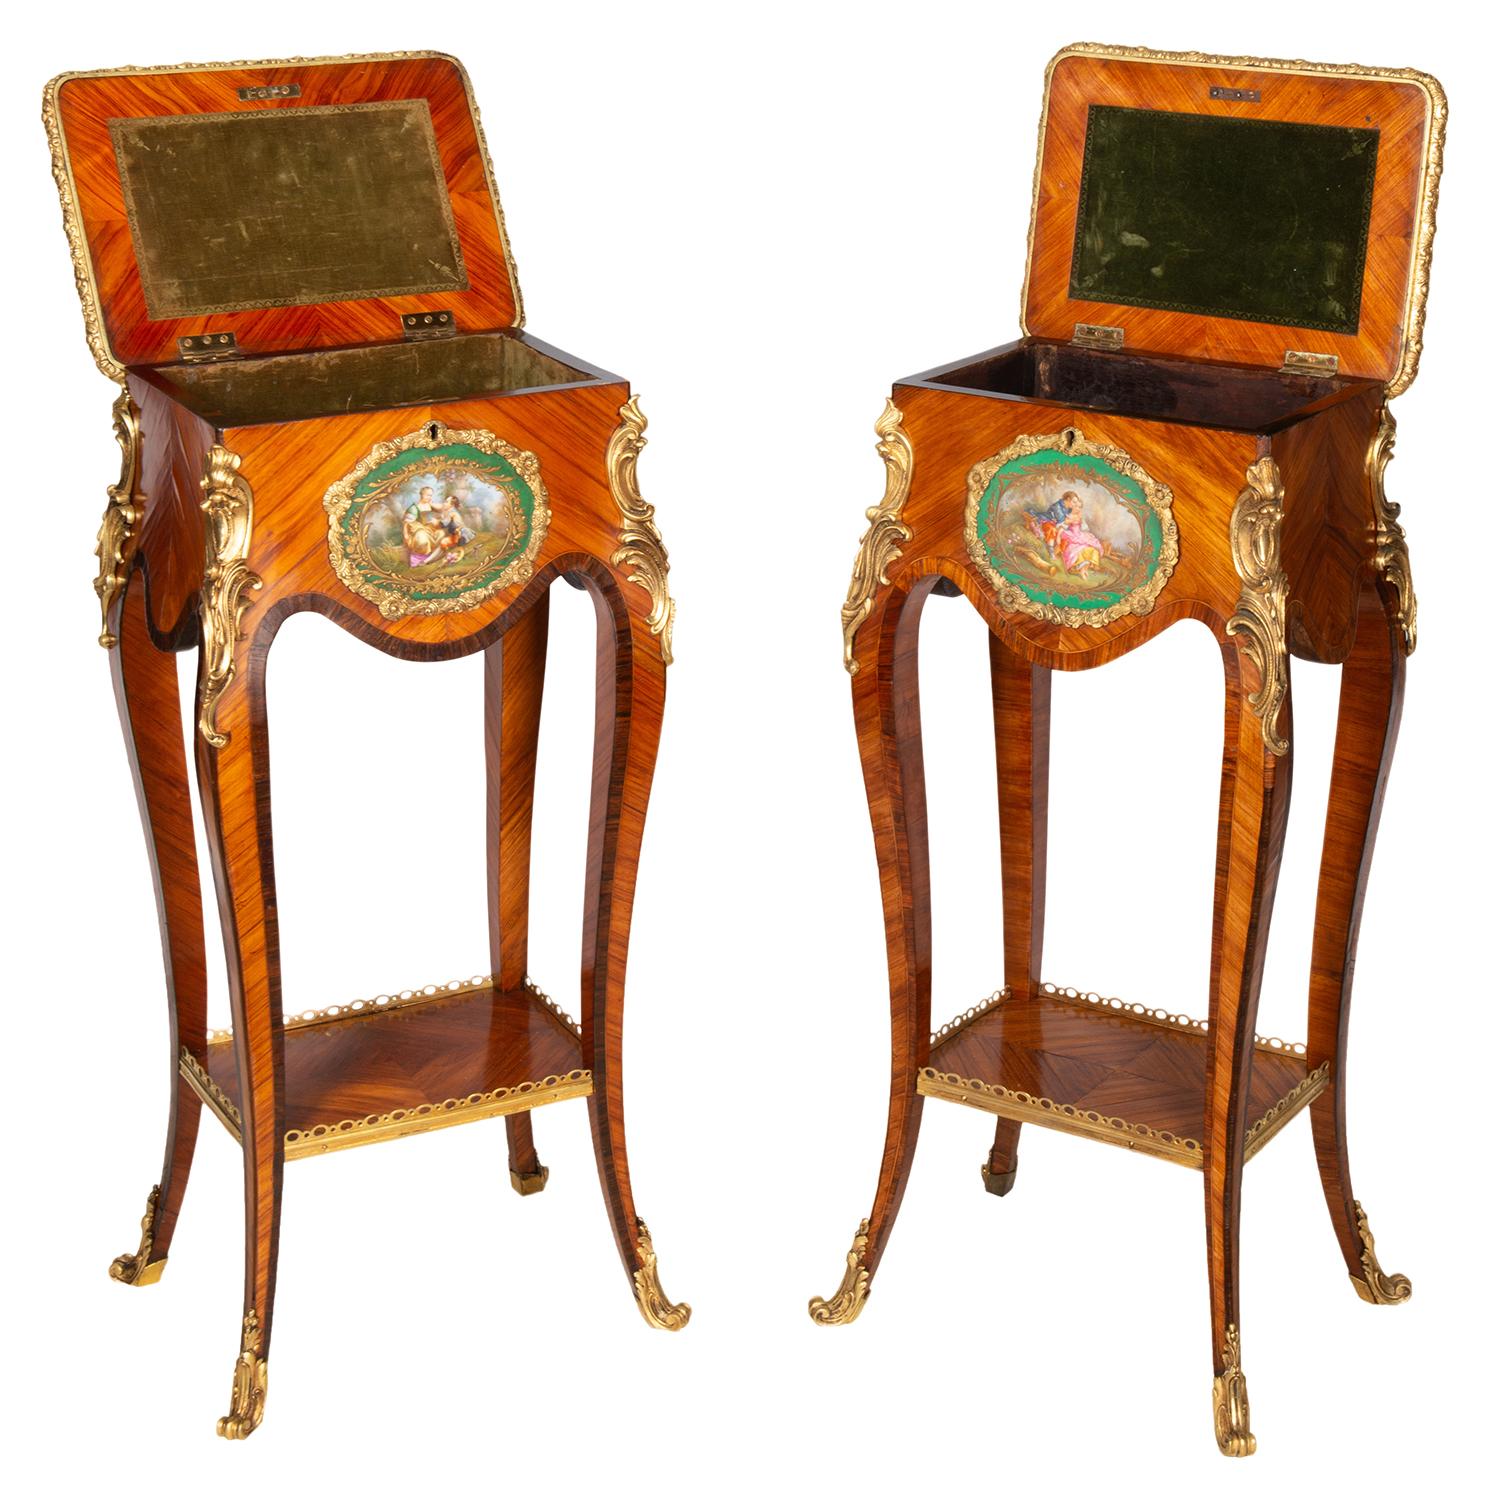 A very good quality matched pair of French Kingwood veneered ormolu-mounted side tables, each with wonderful hand painted Sèvres style porcelain plaques depicting romantic scenes set on a green ground. The lids hinging open to reveal velvet lined